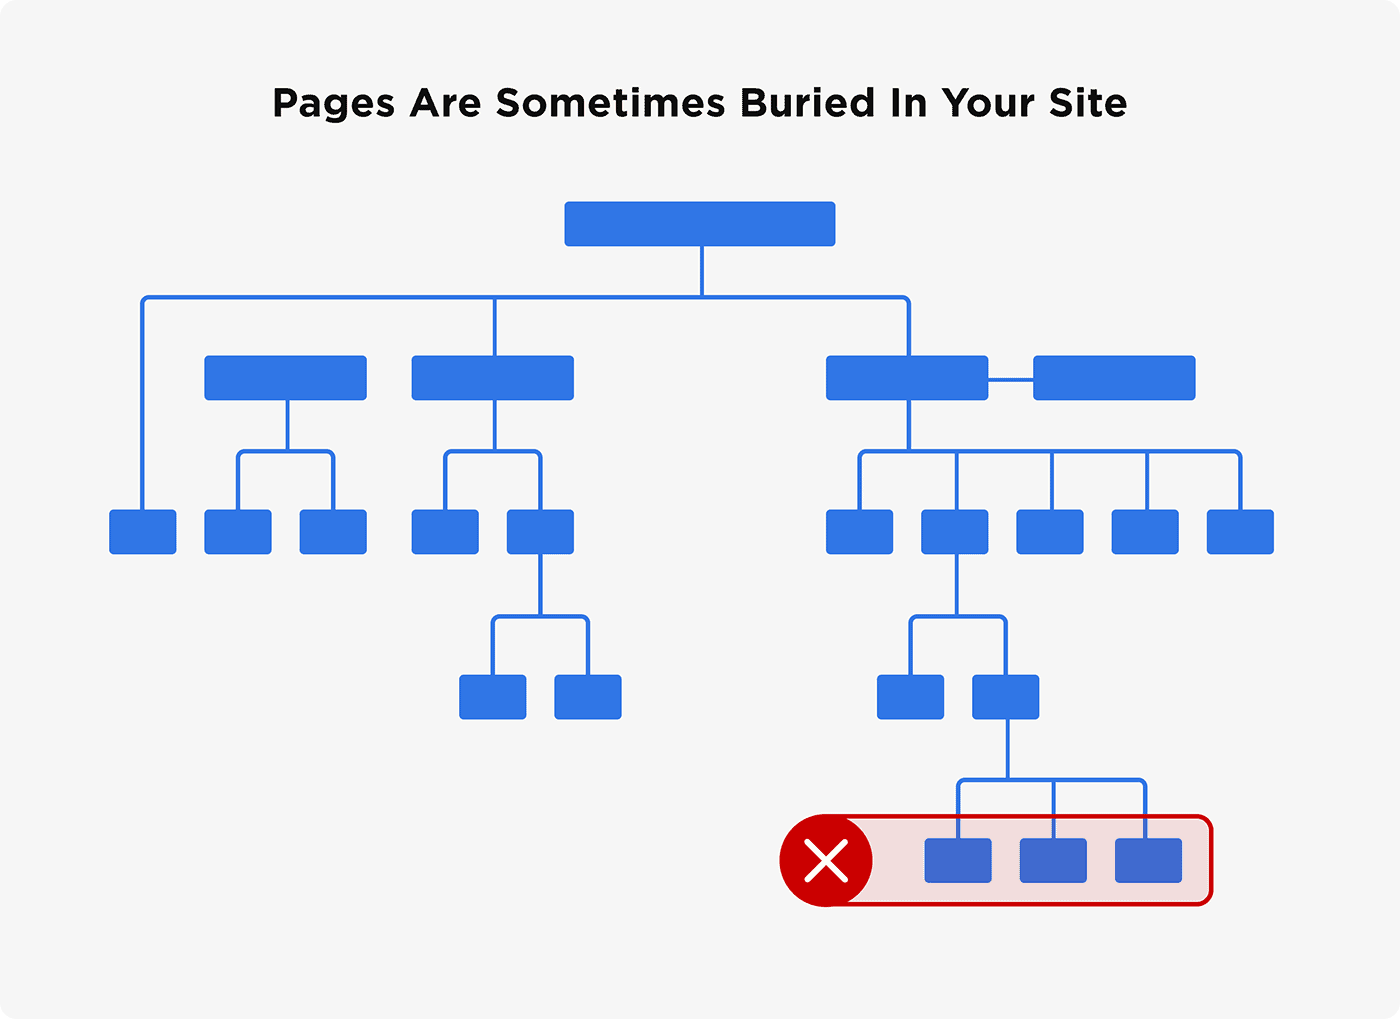 Pages are sometimes buried in your site